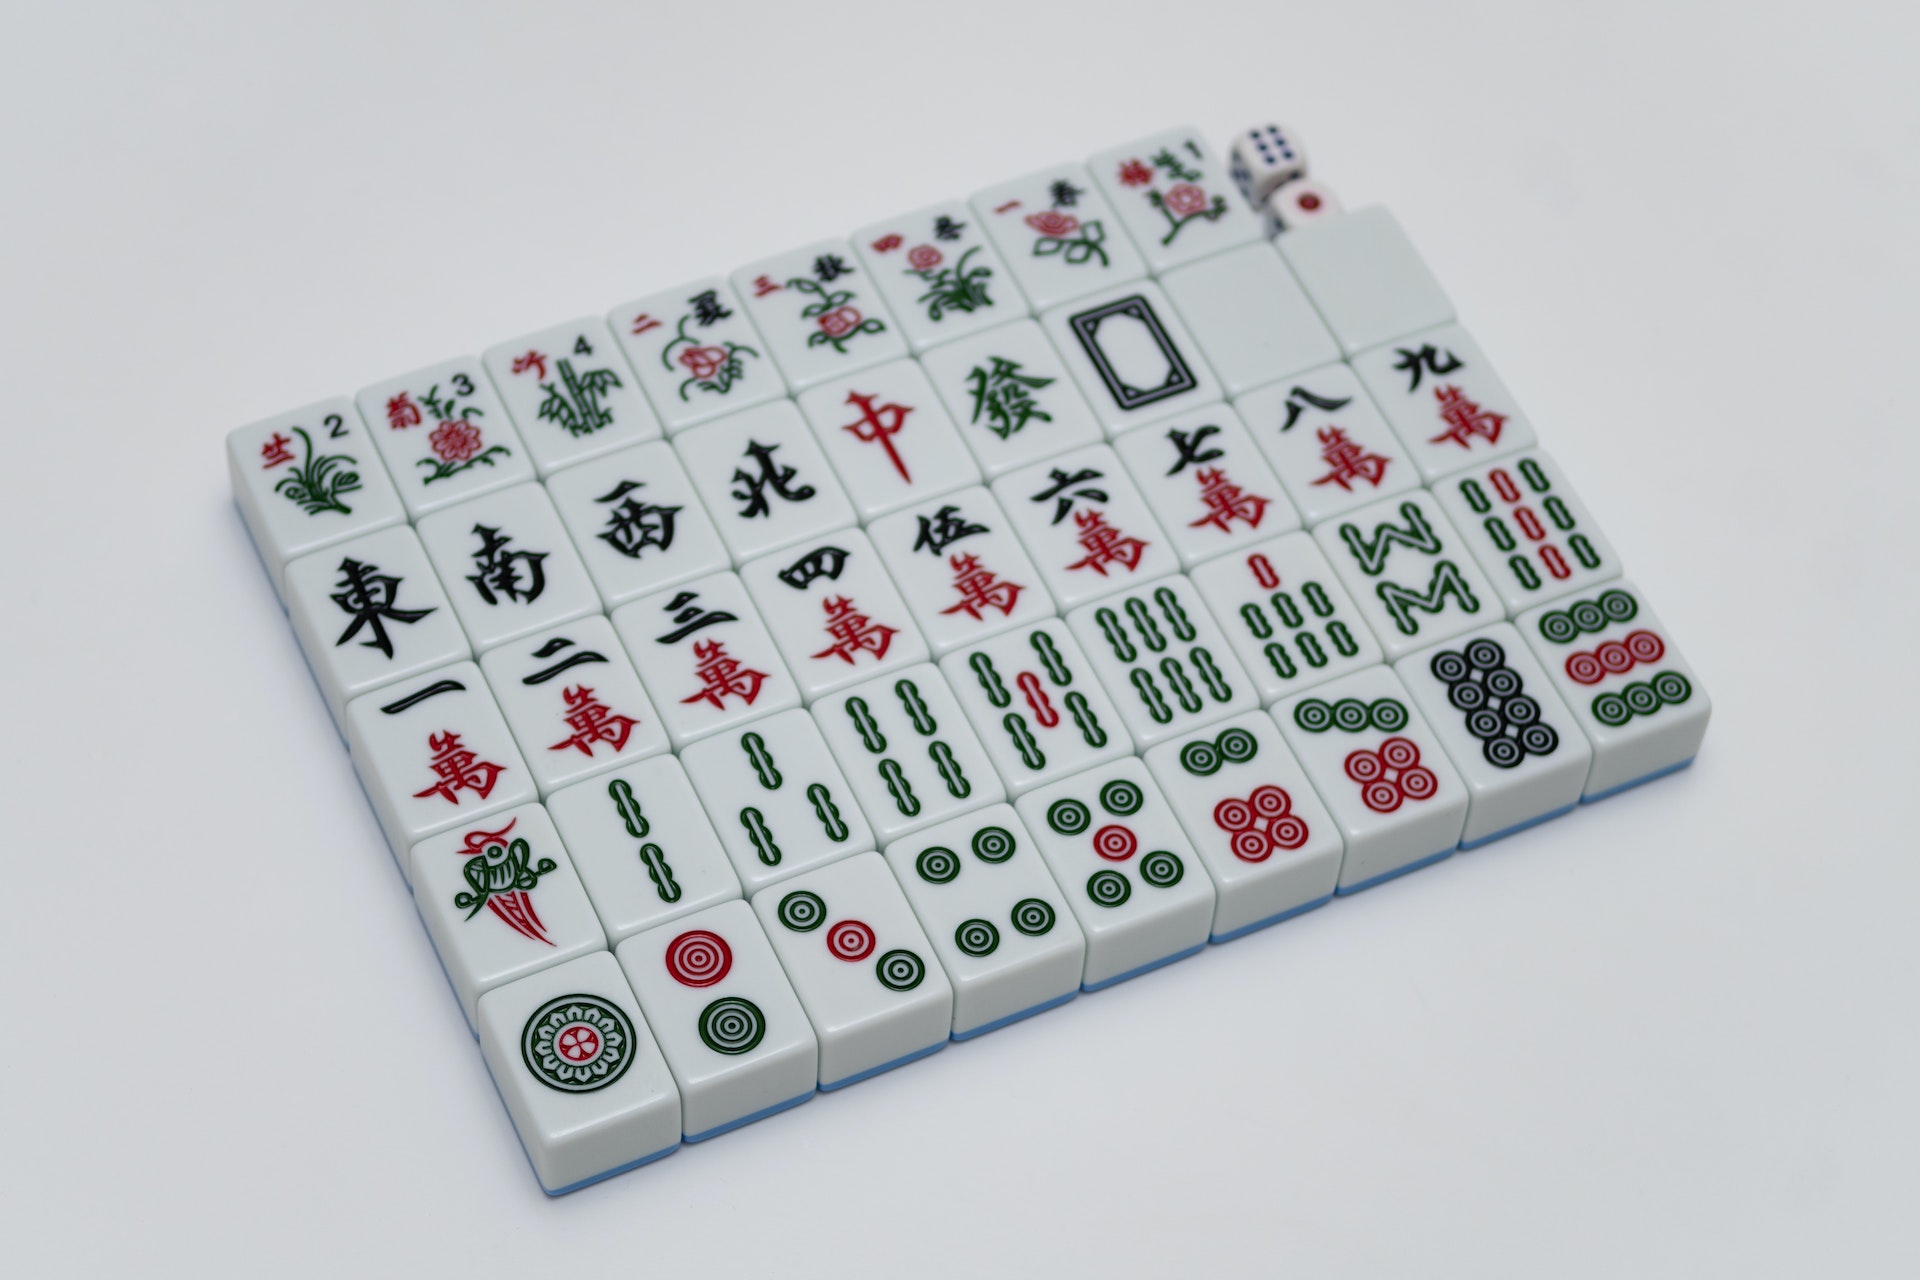 7 Mahjong Strategies to Win the Game - Solitaired